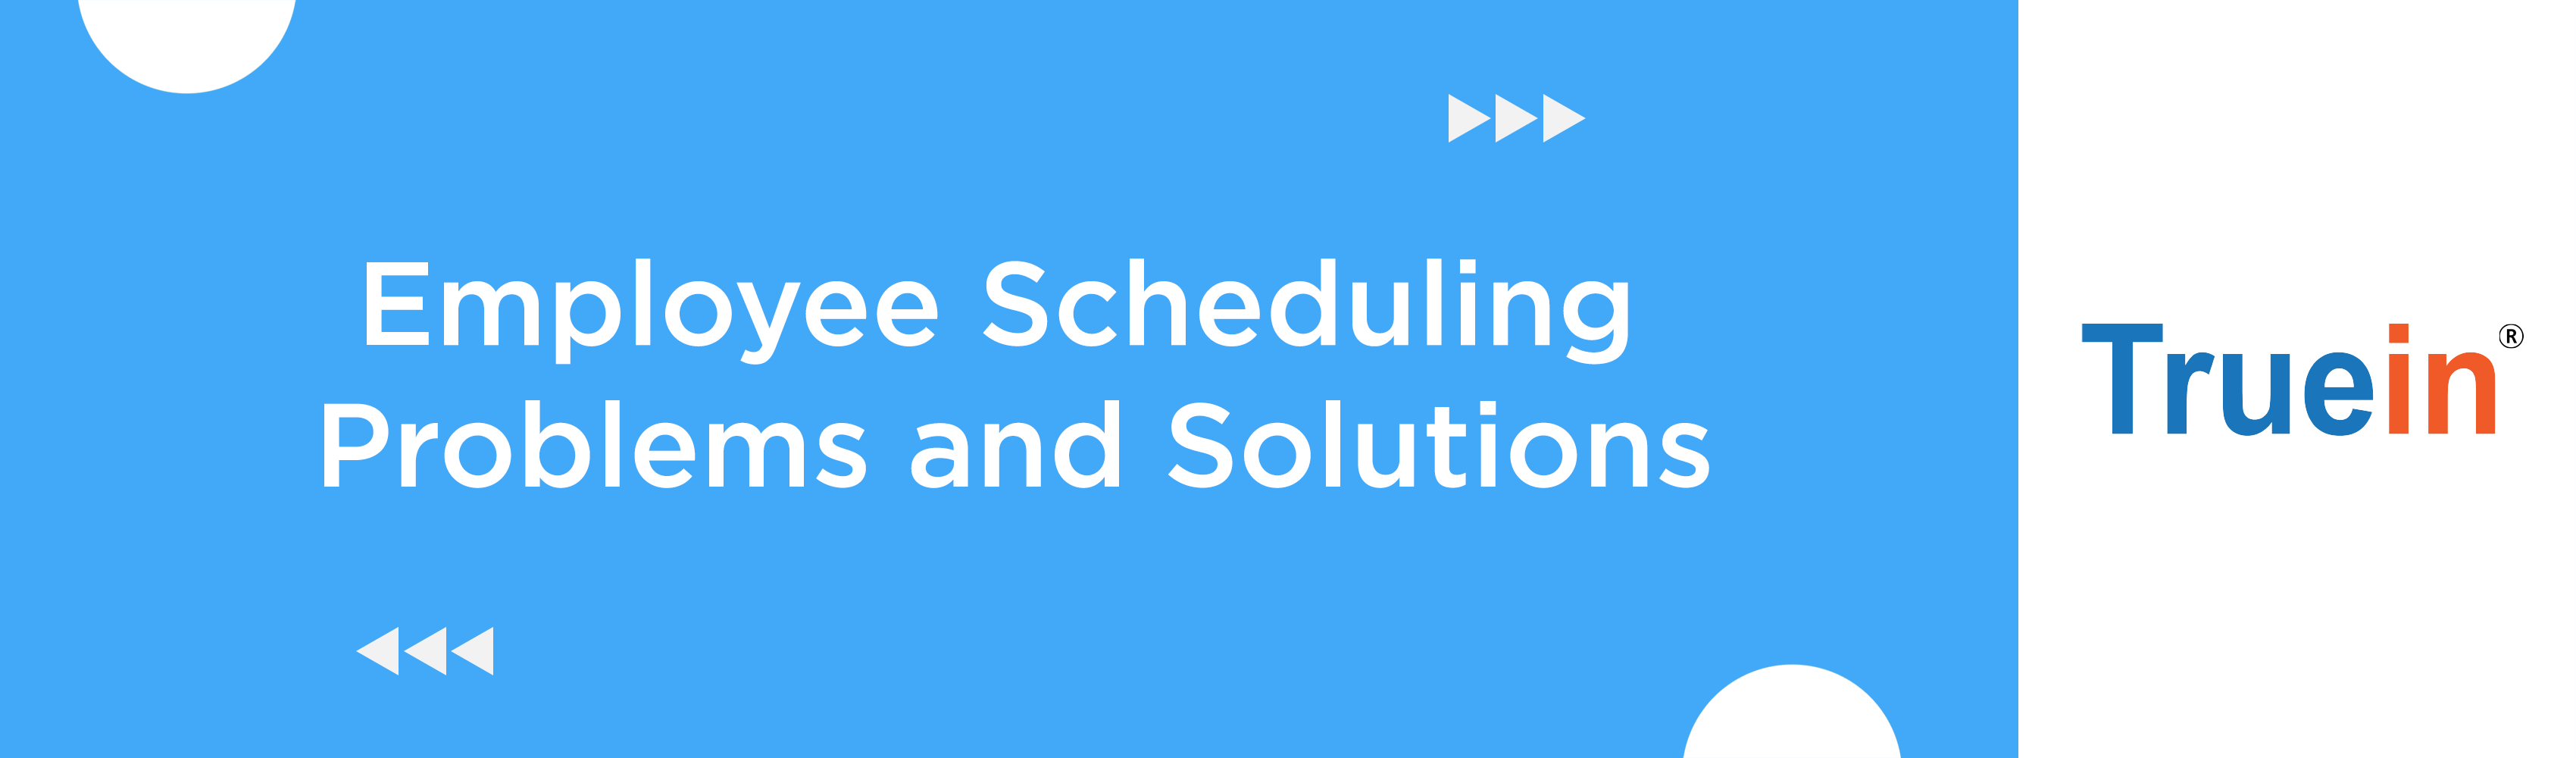 Employee Scheduling Problems and Solutions